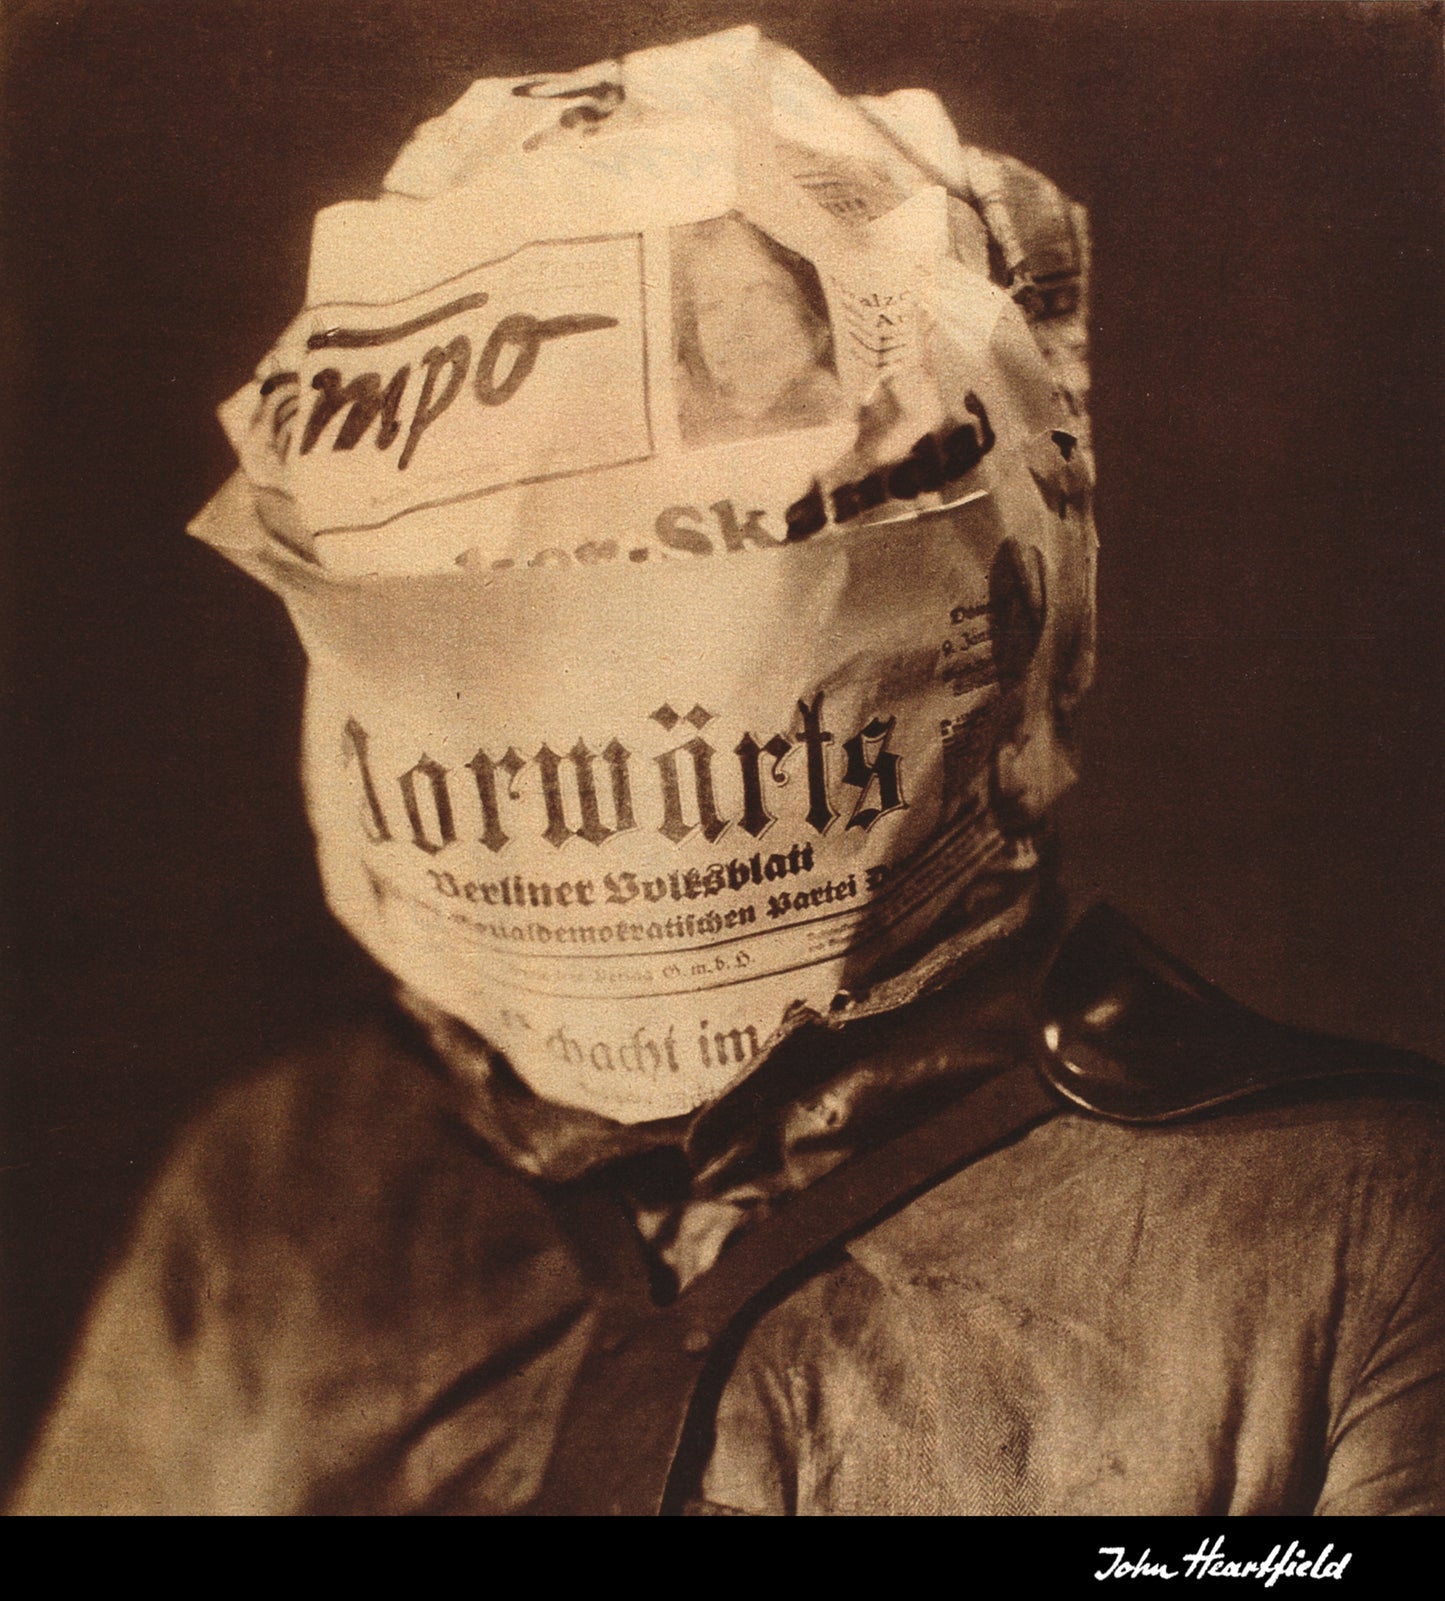 John Heartfield Famous Weimar Replublic Collage "Newspapers Make You Blind and Deaf"